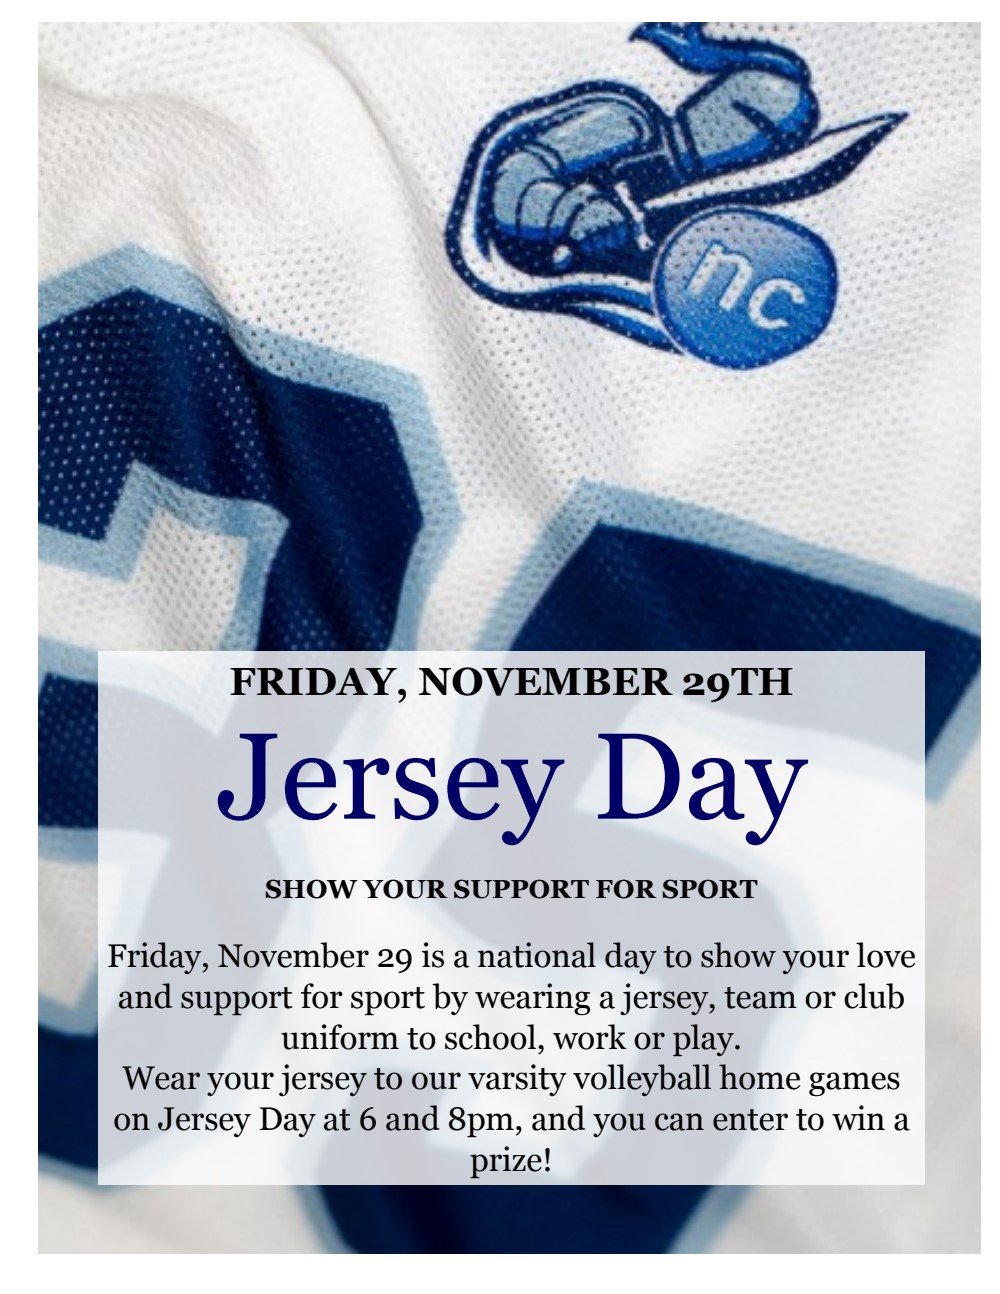 Poster for jersey day in my school : r/engrish